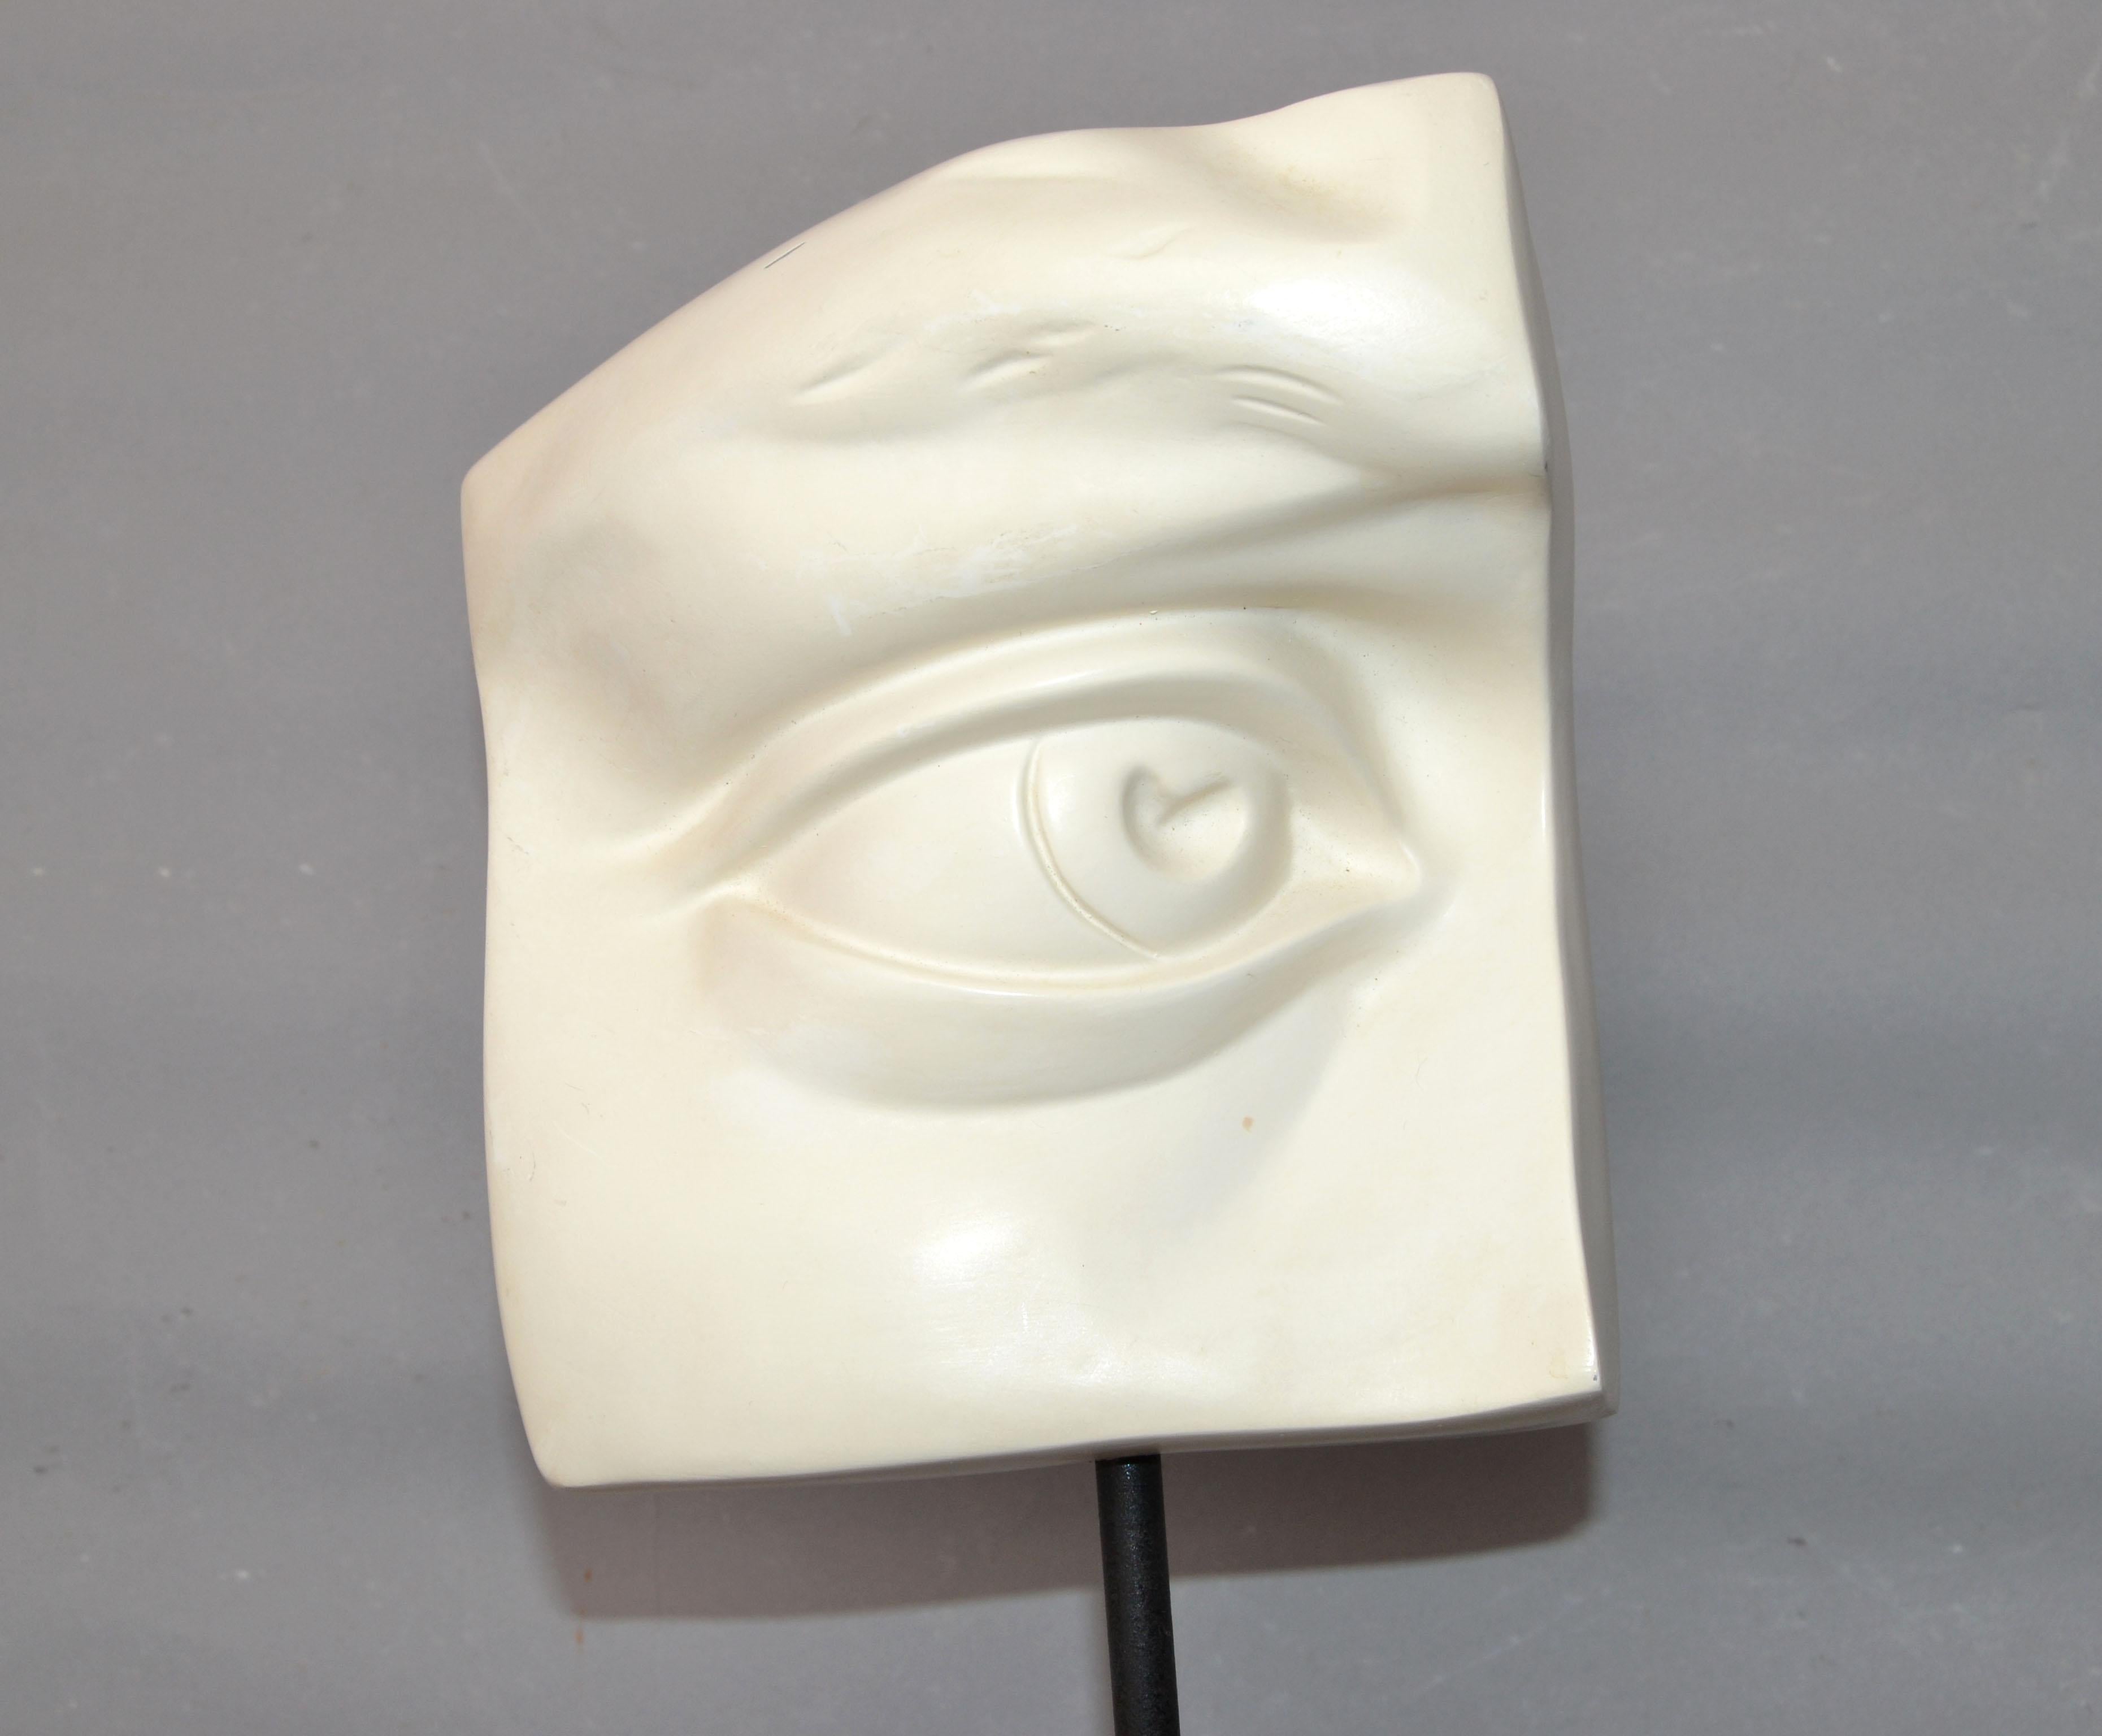 Missing Eye of David Black & White Sculpture Plaster on Wood Mid-Century Modern In Good Condition For Sale In Miami, FL